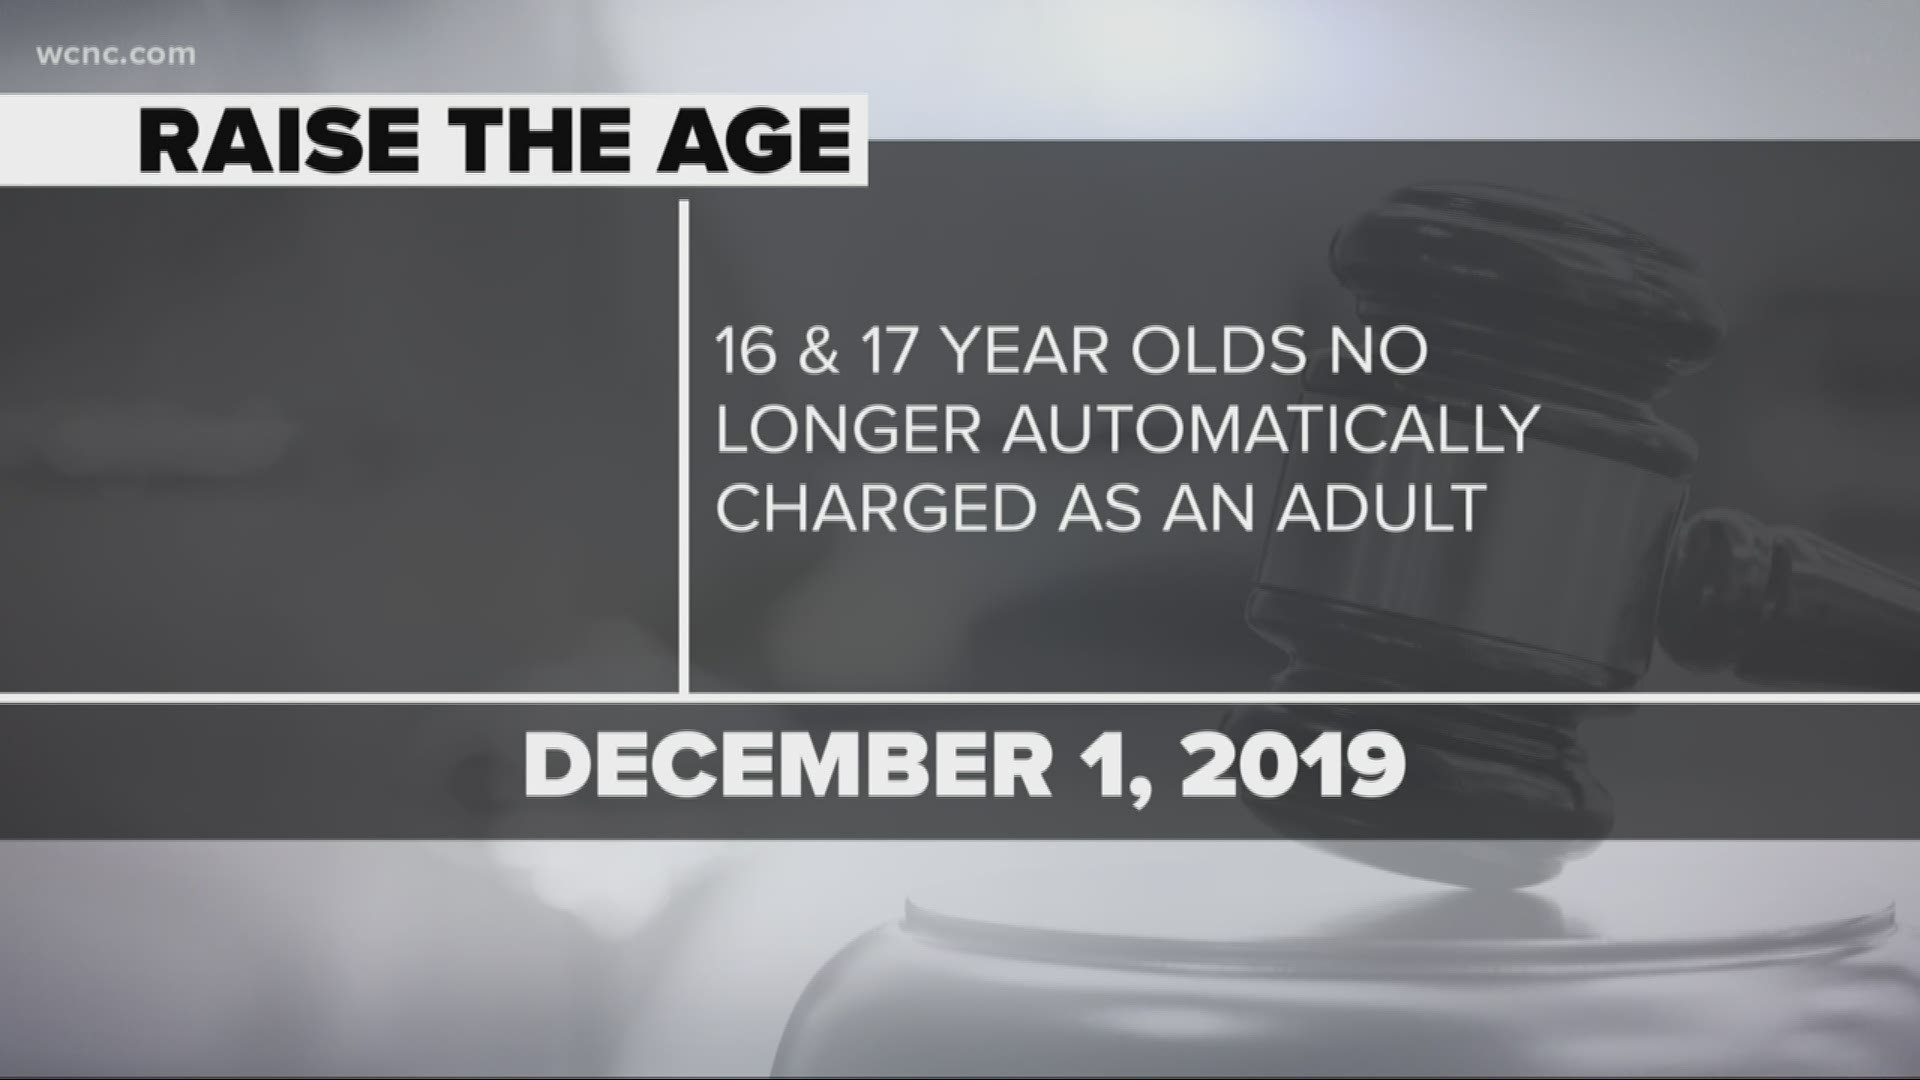 North Carolina Raise The Age Goes Into Effect December 1